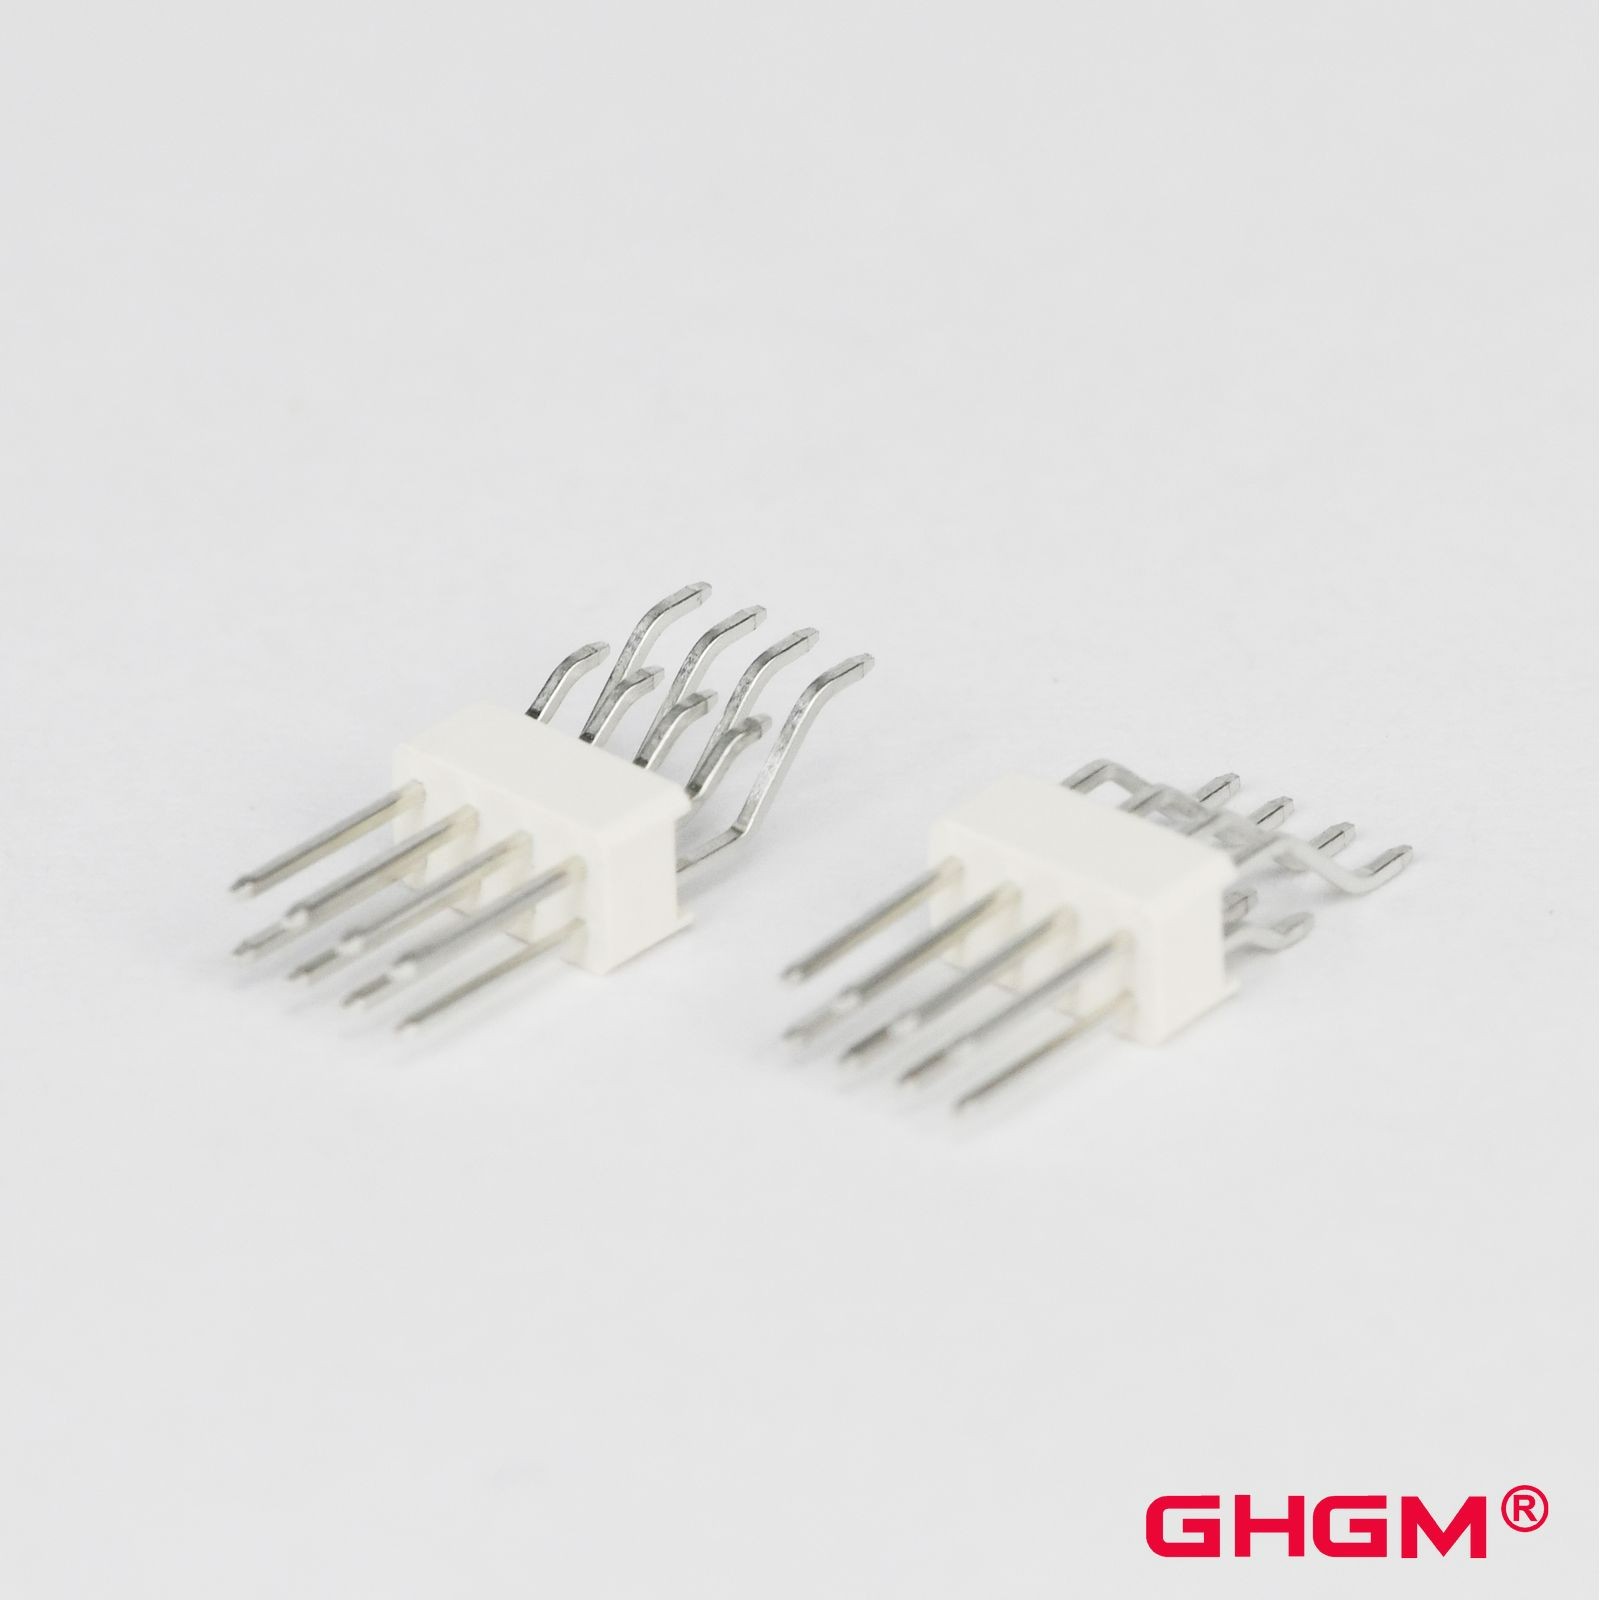 G15 M2028 Pitch 1.5mm SMT Straight Needle Male connector, Intelligent Light Connector, smart light connector, male connector